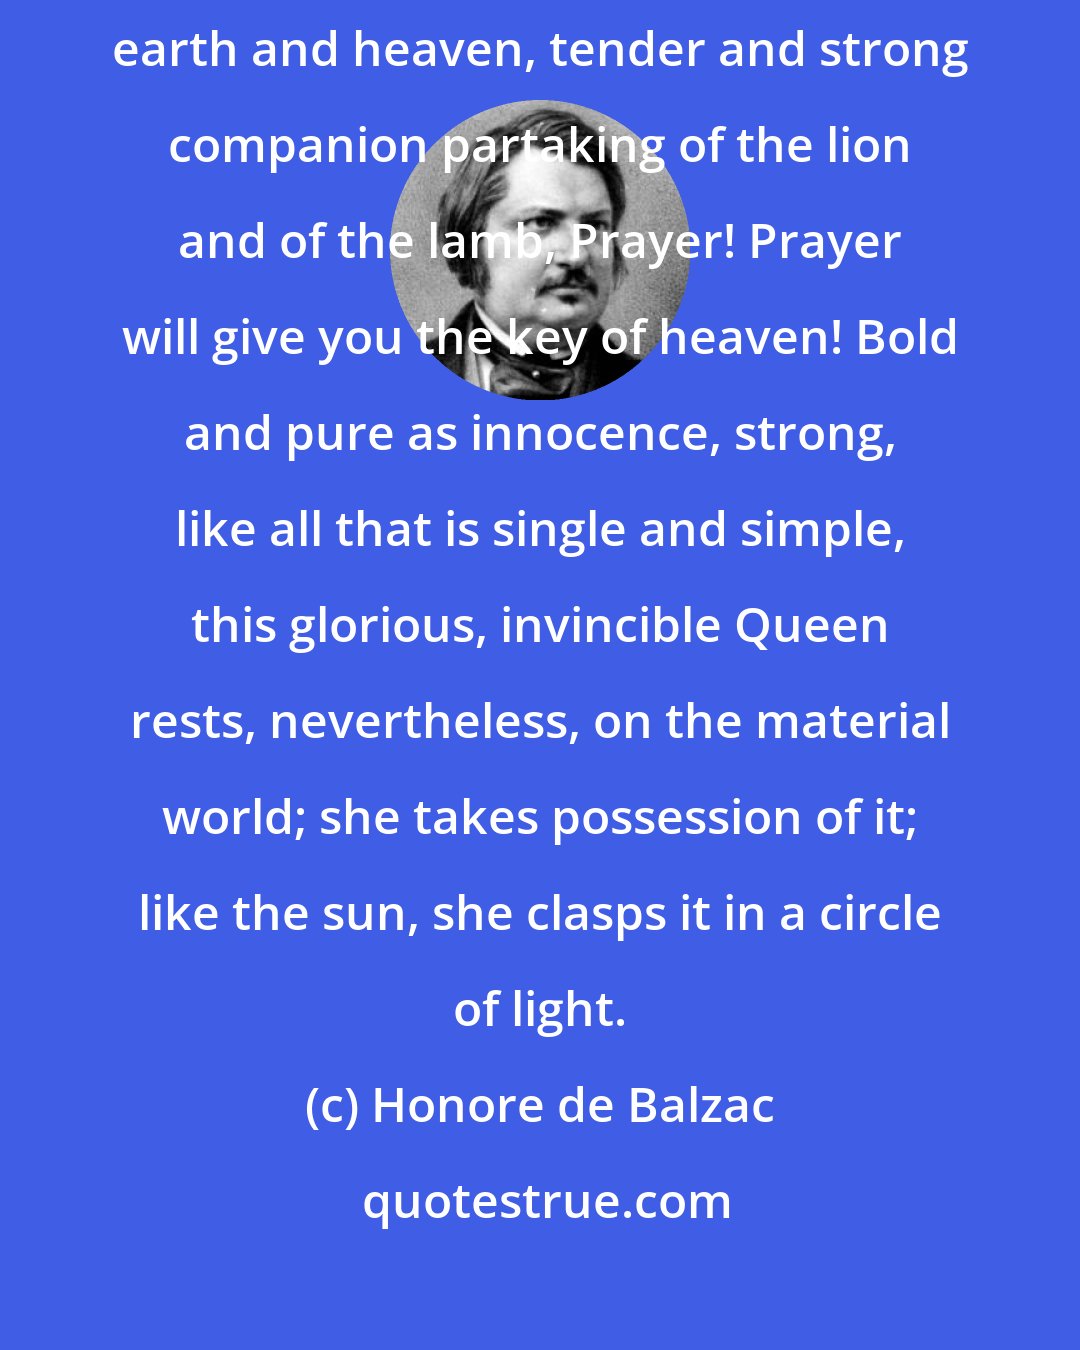 Honore de Balzac: White and shining virgin of all human virtues, ark of the covenant between earth and heaven, tender and strong companion partaking of the lion and of the lamb, Prayer! Prayer will give you the key of heaven! Bold and pure as innocence, strong, like all that is single and simple, this glorious, invincible Queen rests, nevertheless, on the material world; she takes possession of it; like the sun, she clasps it in a circle of light.